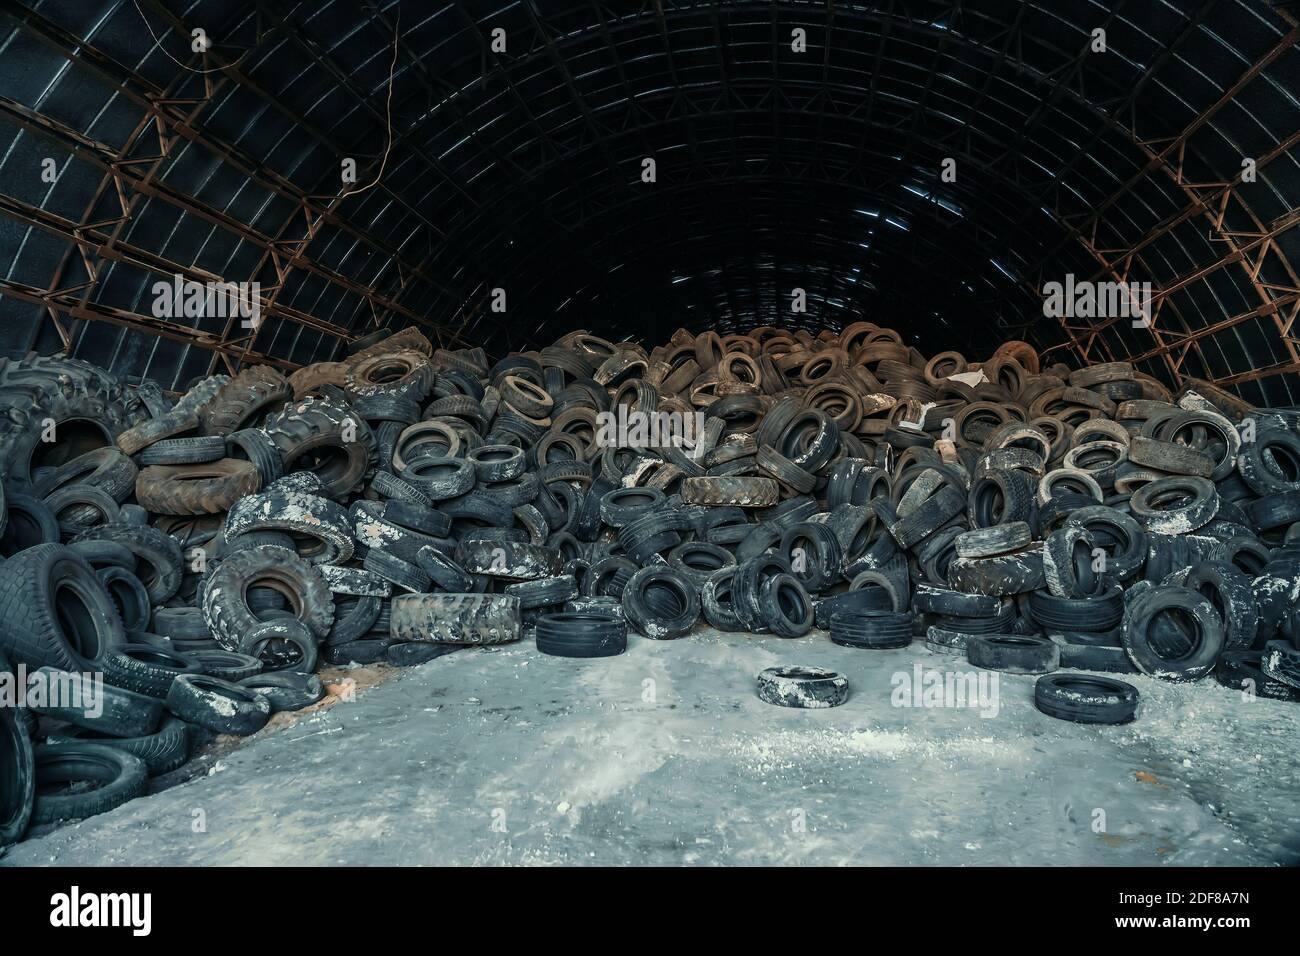 Large pile of old used car and truck tires in abandoned hangar. Stock Photo